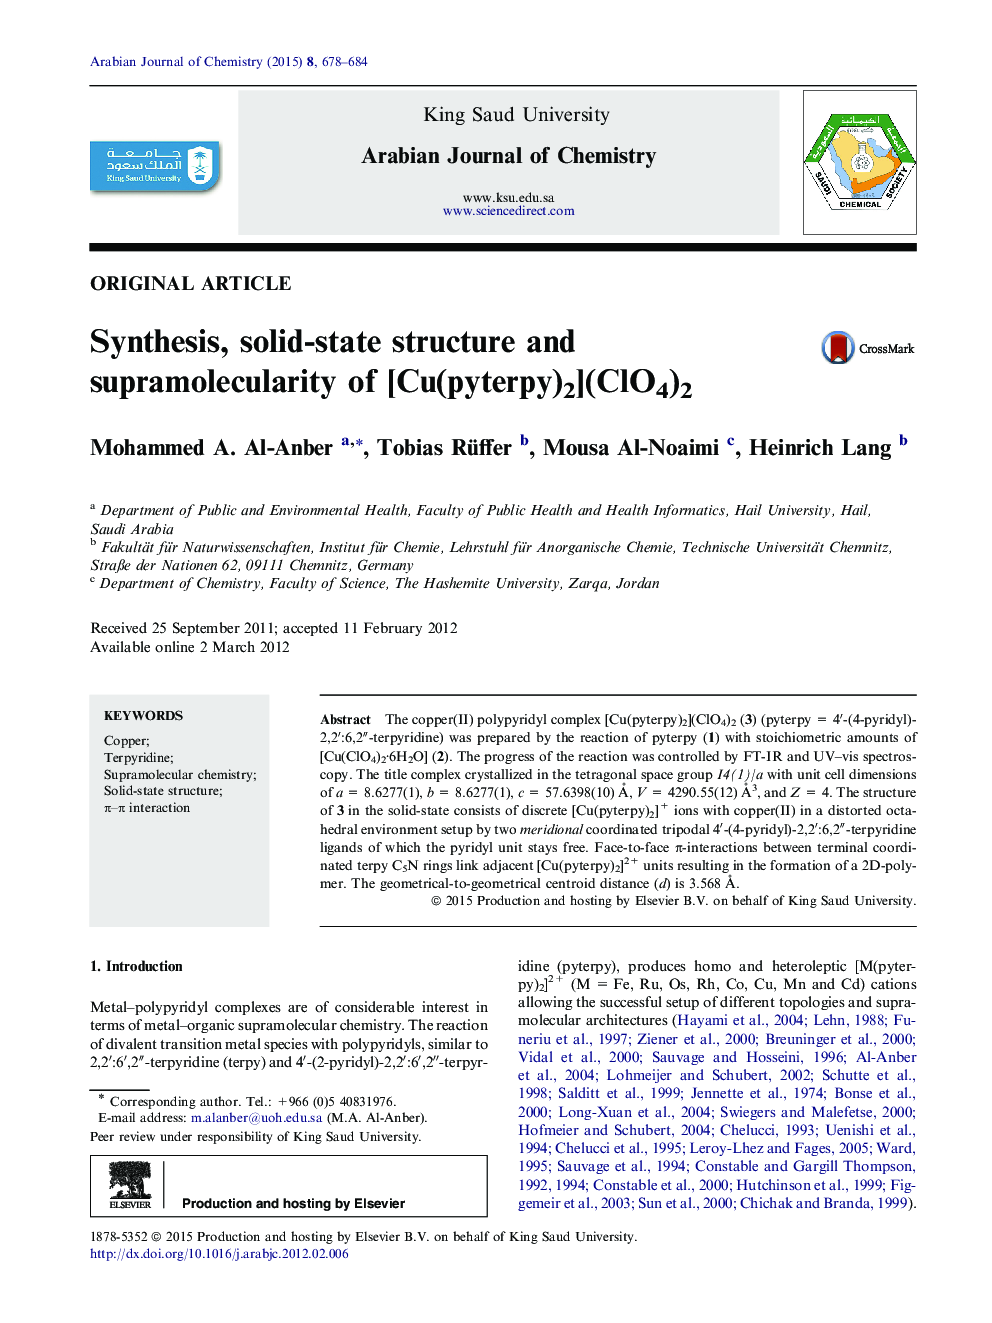 Synthesis, solid-state structure and supramolecularity of [Cu(pyterpy)2](ClO4)2